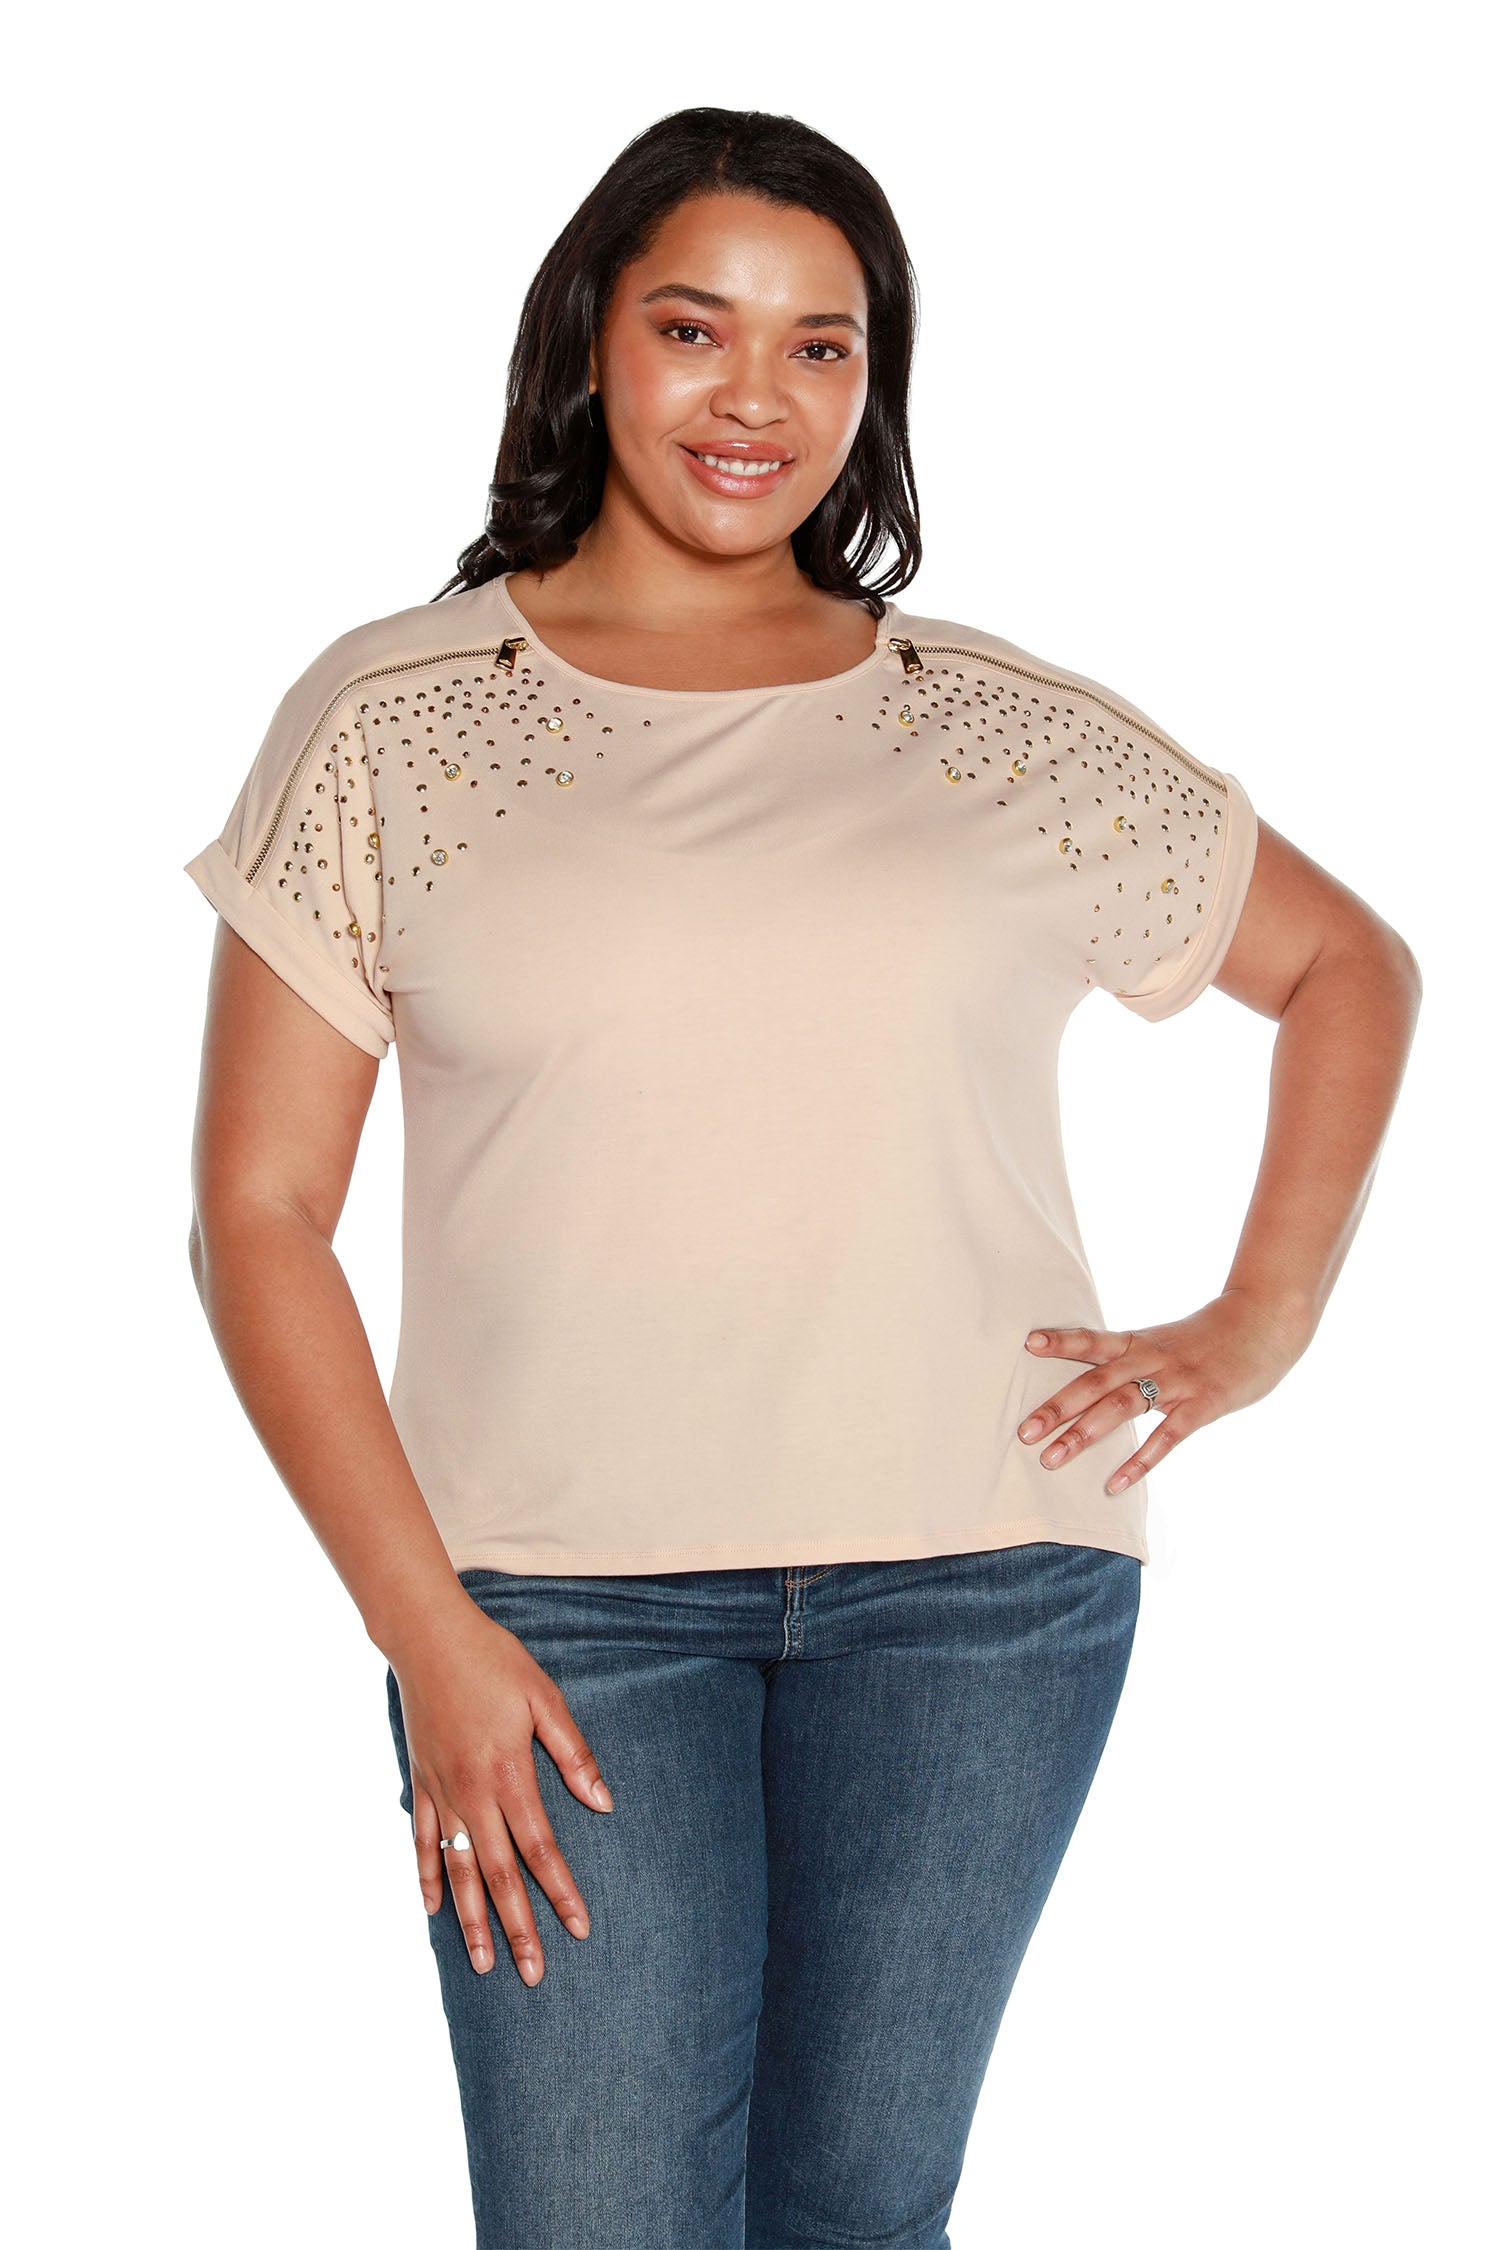 Women's Cap Sleeve Top with Zippers, Rhinestone and Stud Embellishments | Curvy